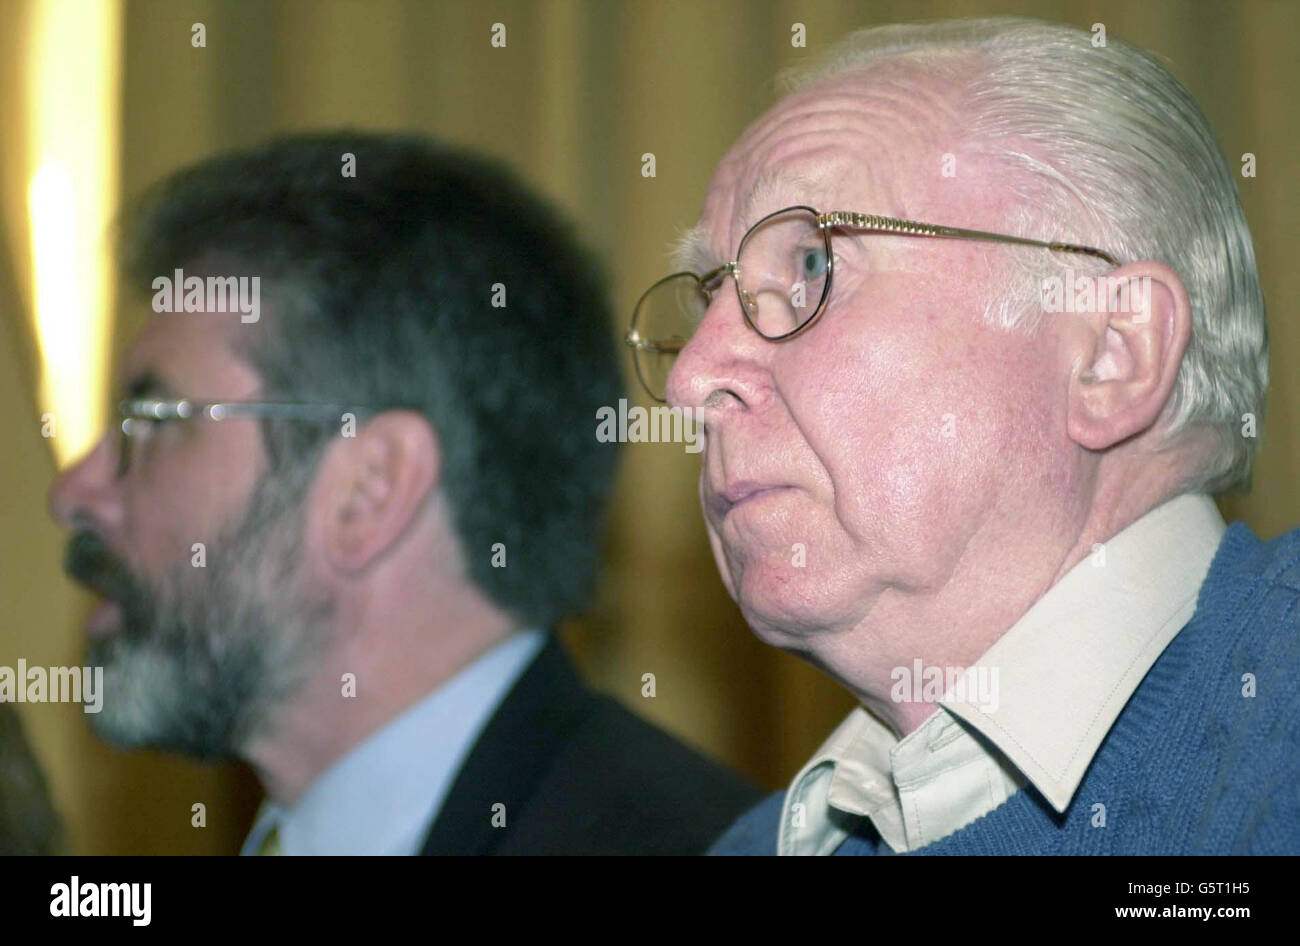 Sinn Fein President Gerry Adams announces details of a national tribute to familes of IRA volunteers, Sinn Fein activists and other republican activists who were killed in recent times, in Dublin with Paddy Mulvenna. *...., whose son, who was an IRA volunteer killed during the Troubles in Northern Ireland. Stock Photo